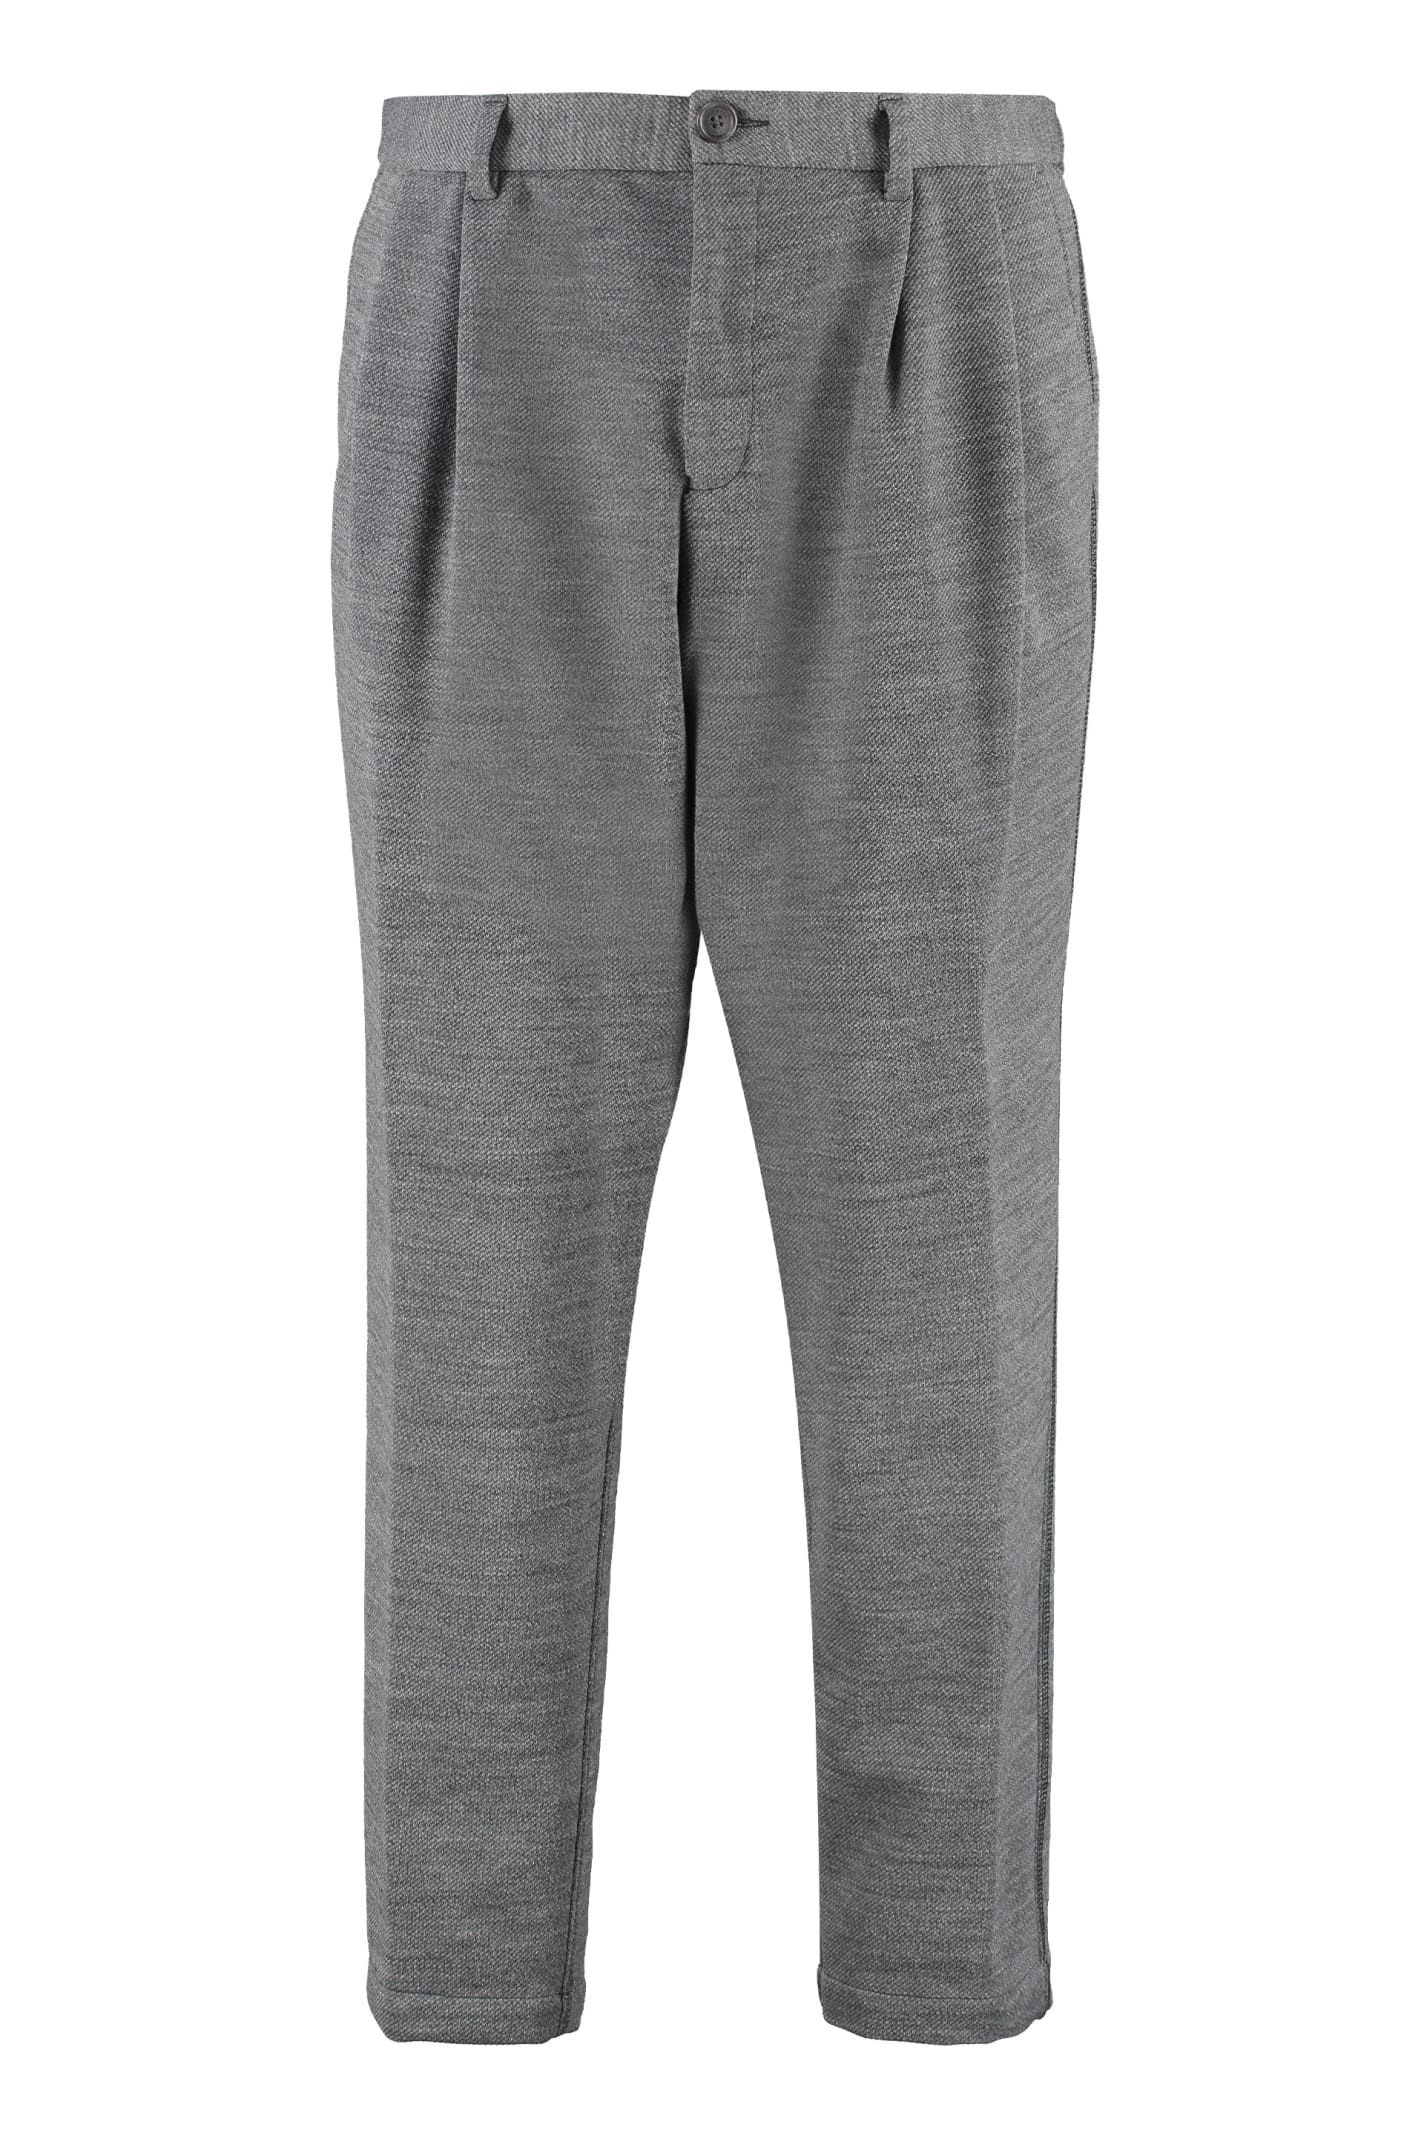 Hugo Boss Boss X Russell Athletic - Wool Blend Tailored Trousers